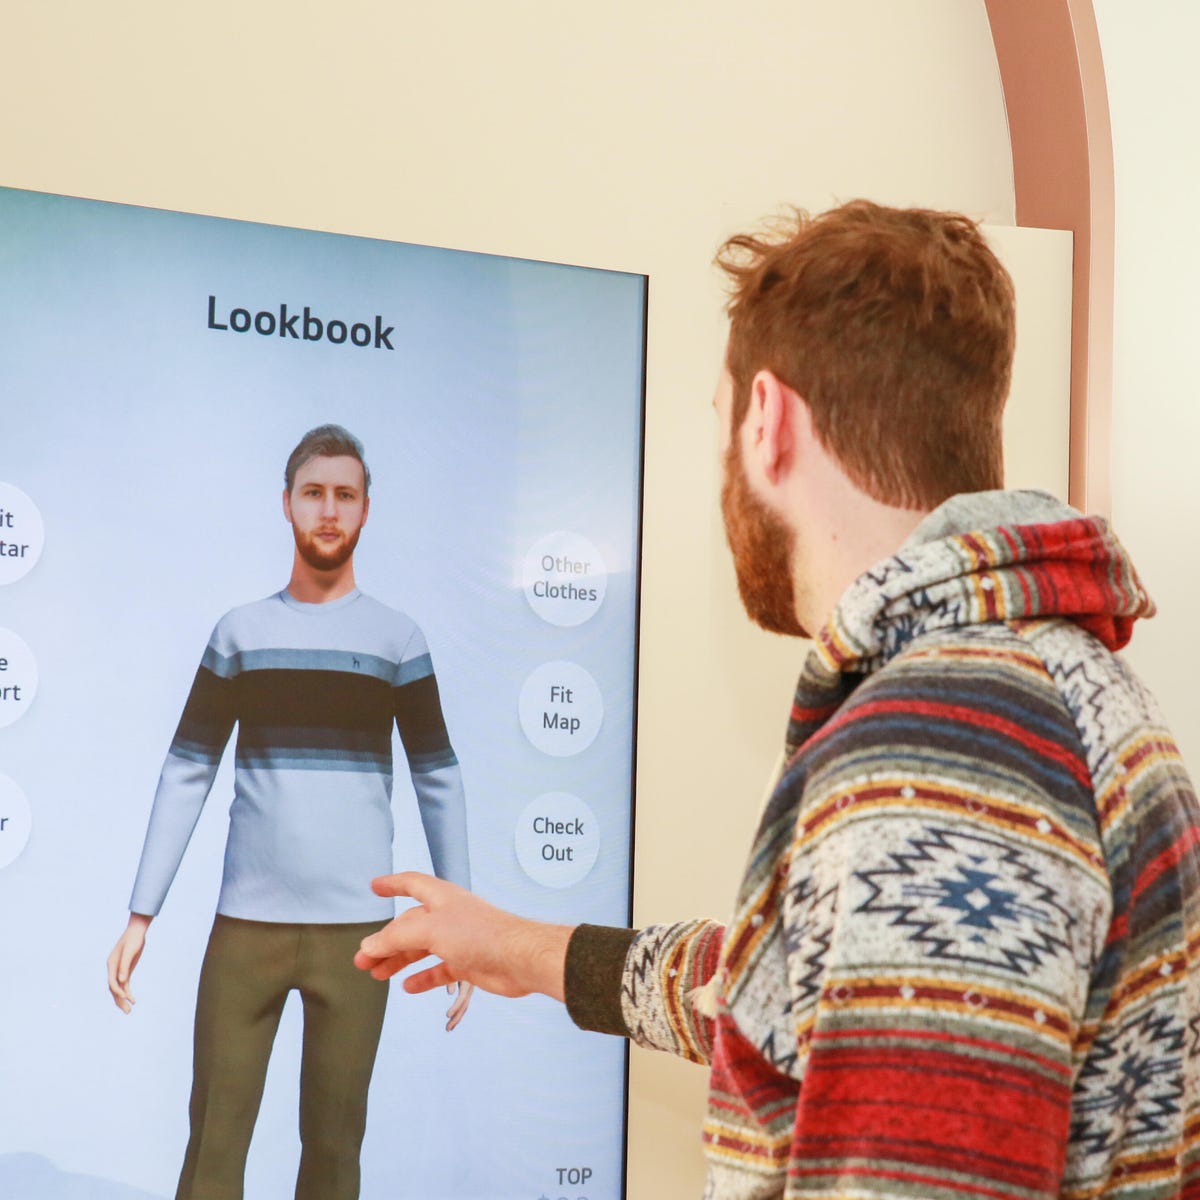 Smart mirrors just make you hate yourself - CNET